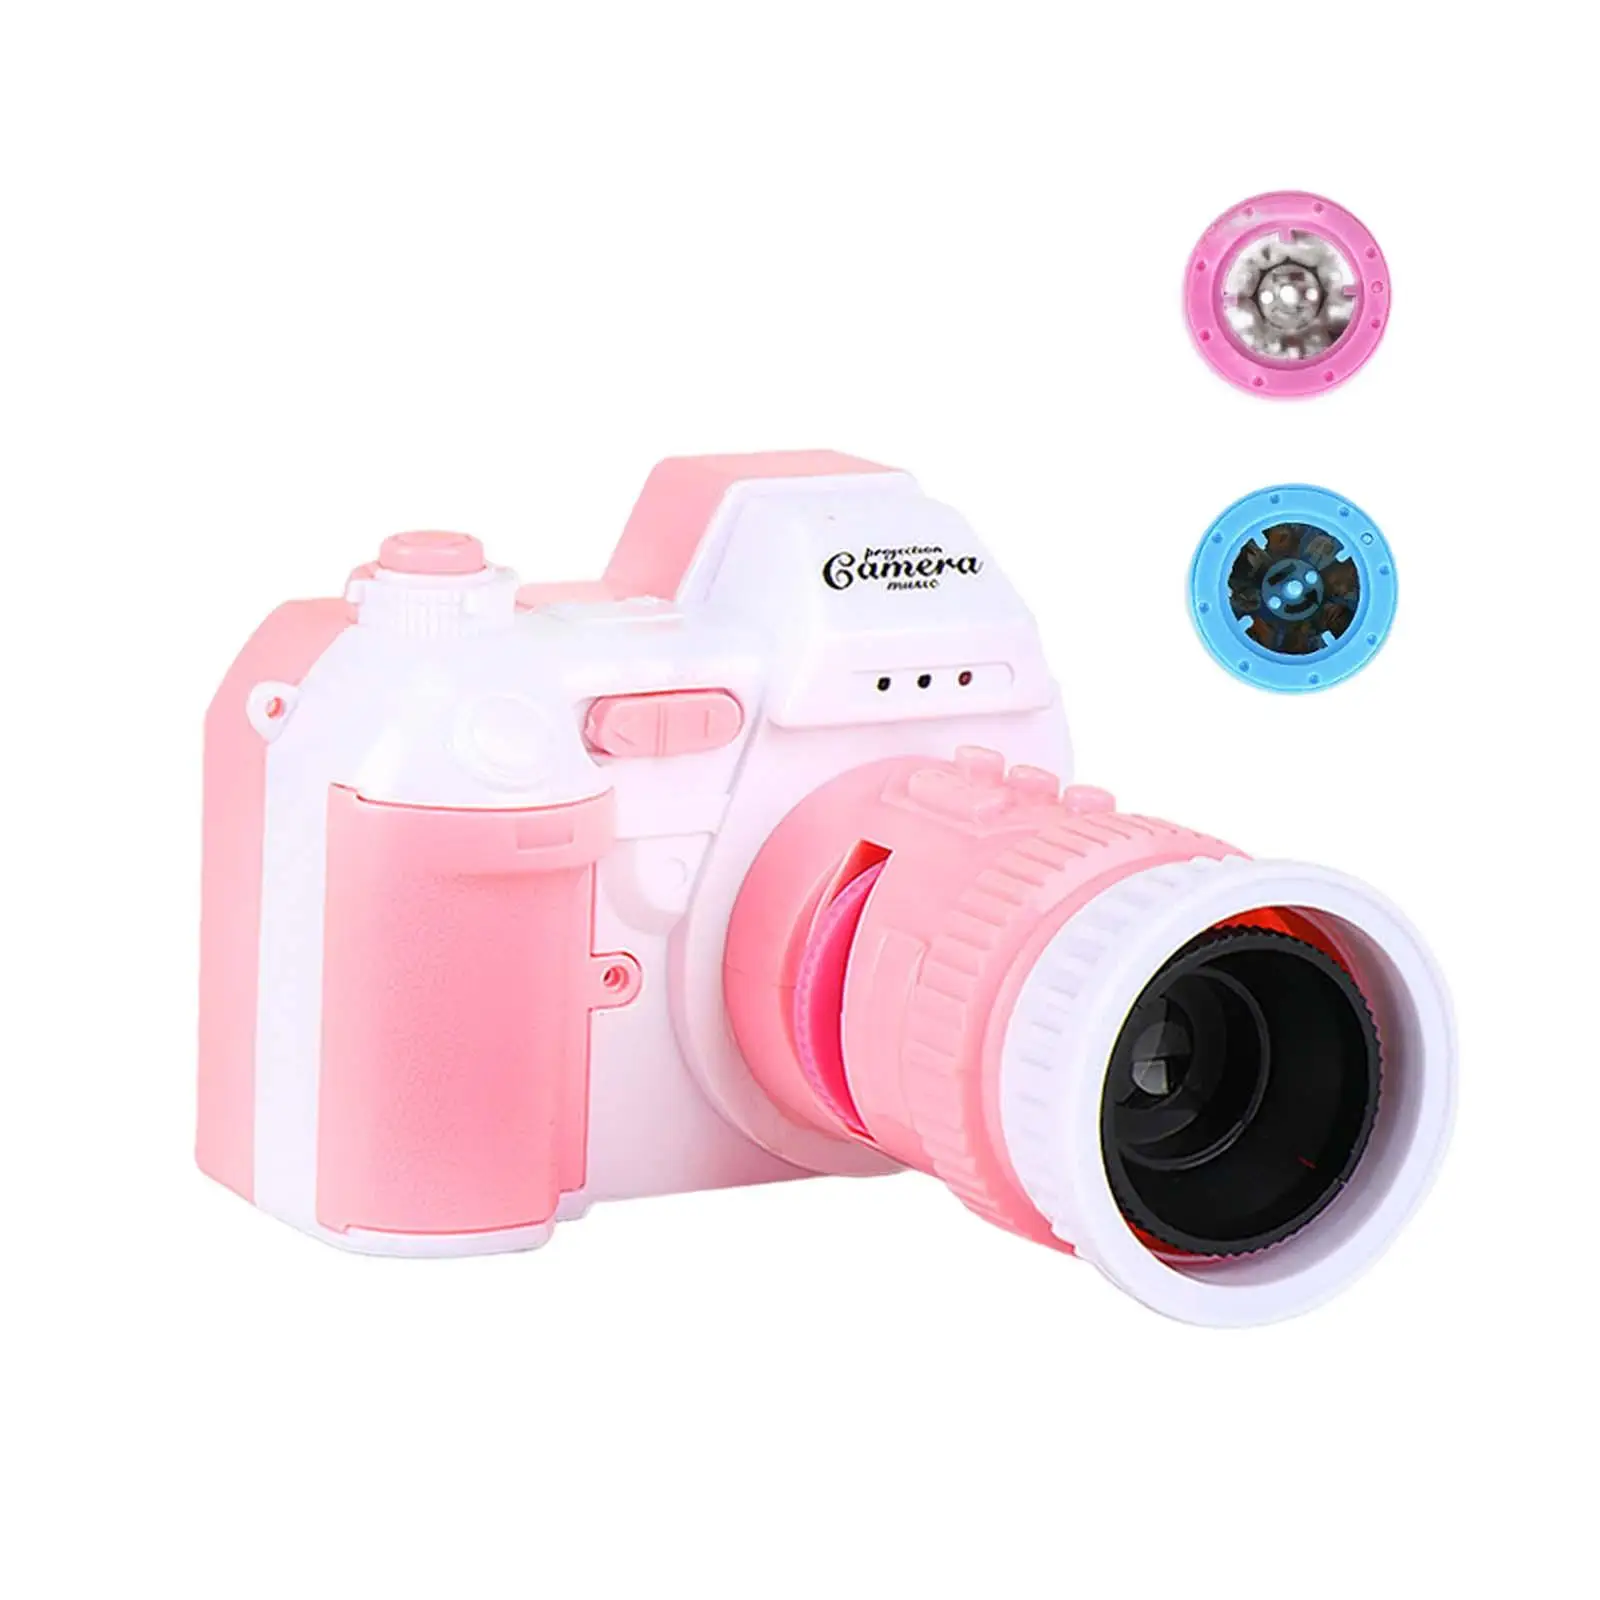 Portable Projection Camera Toy Educational Toy for Children Day Boys Girls